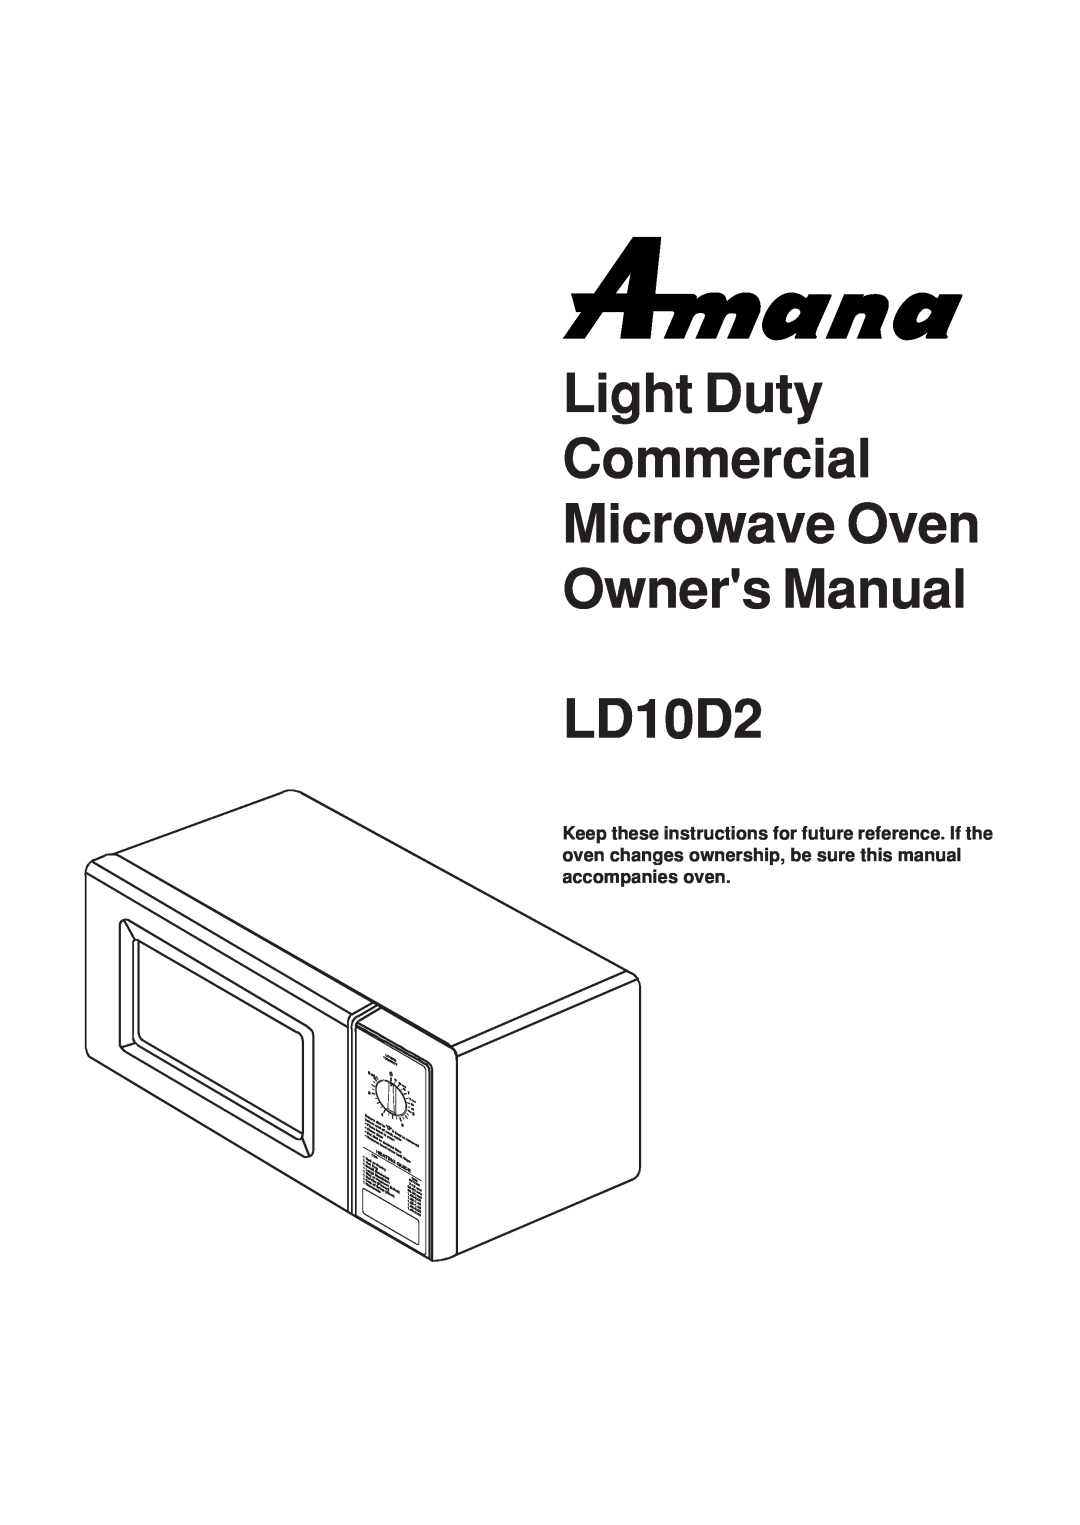 Amana LD10D2 owner manual Light Duty Commercial Microwave Oven 